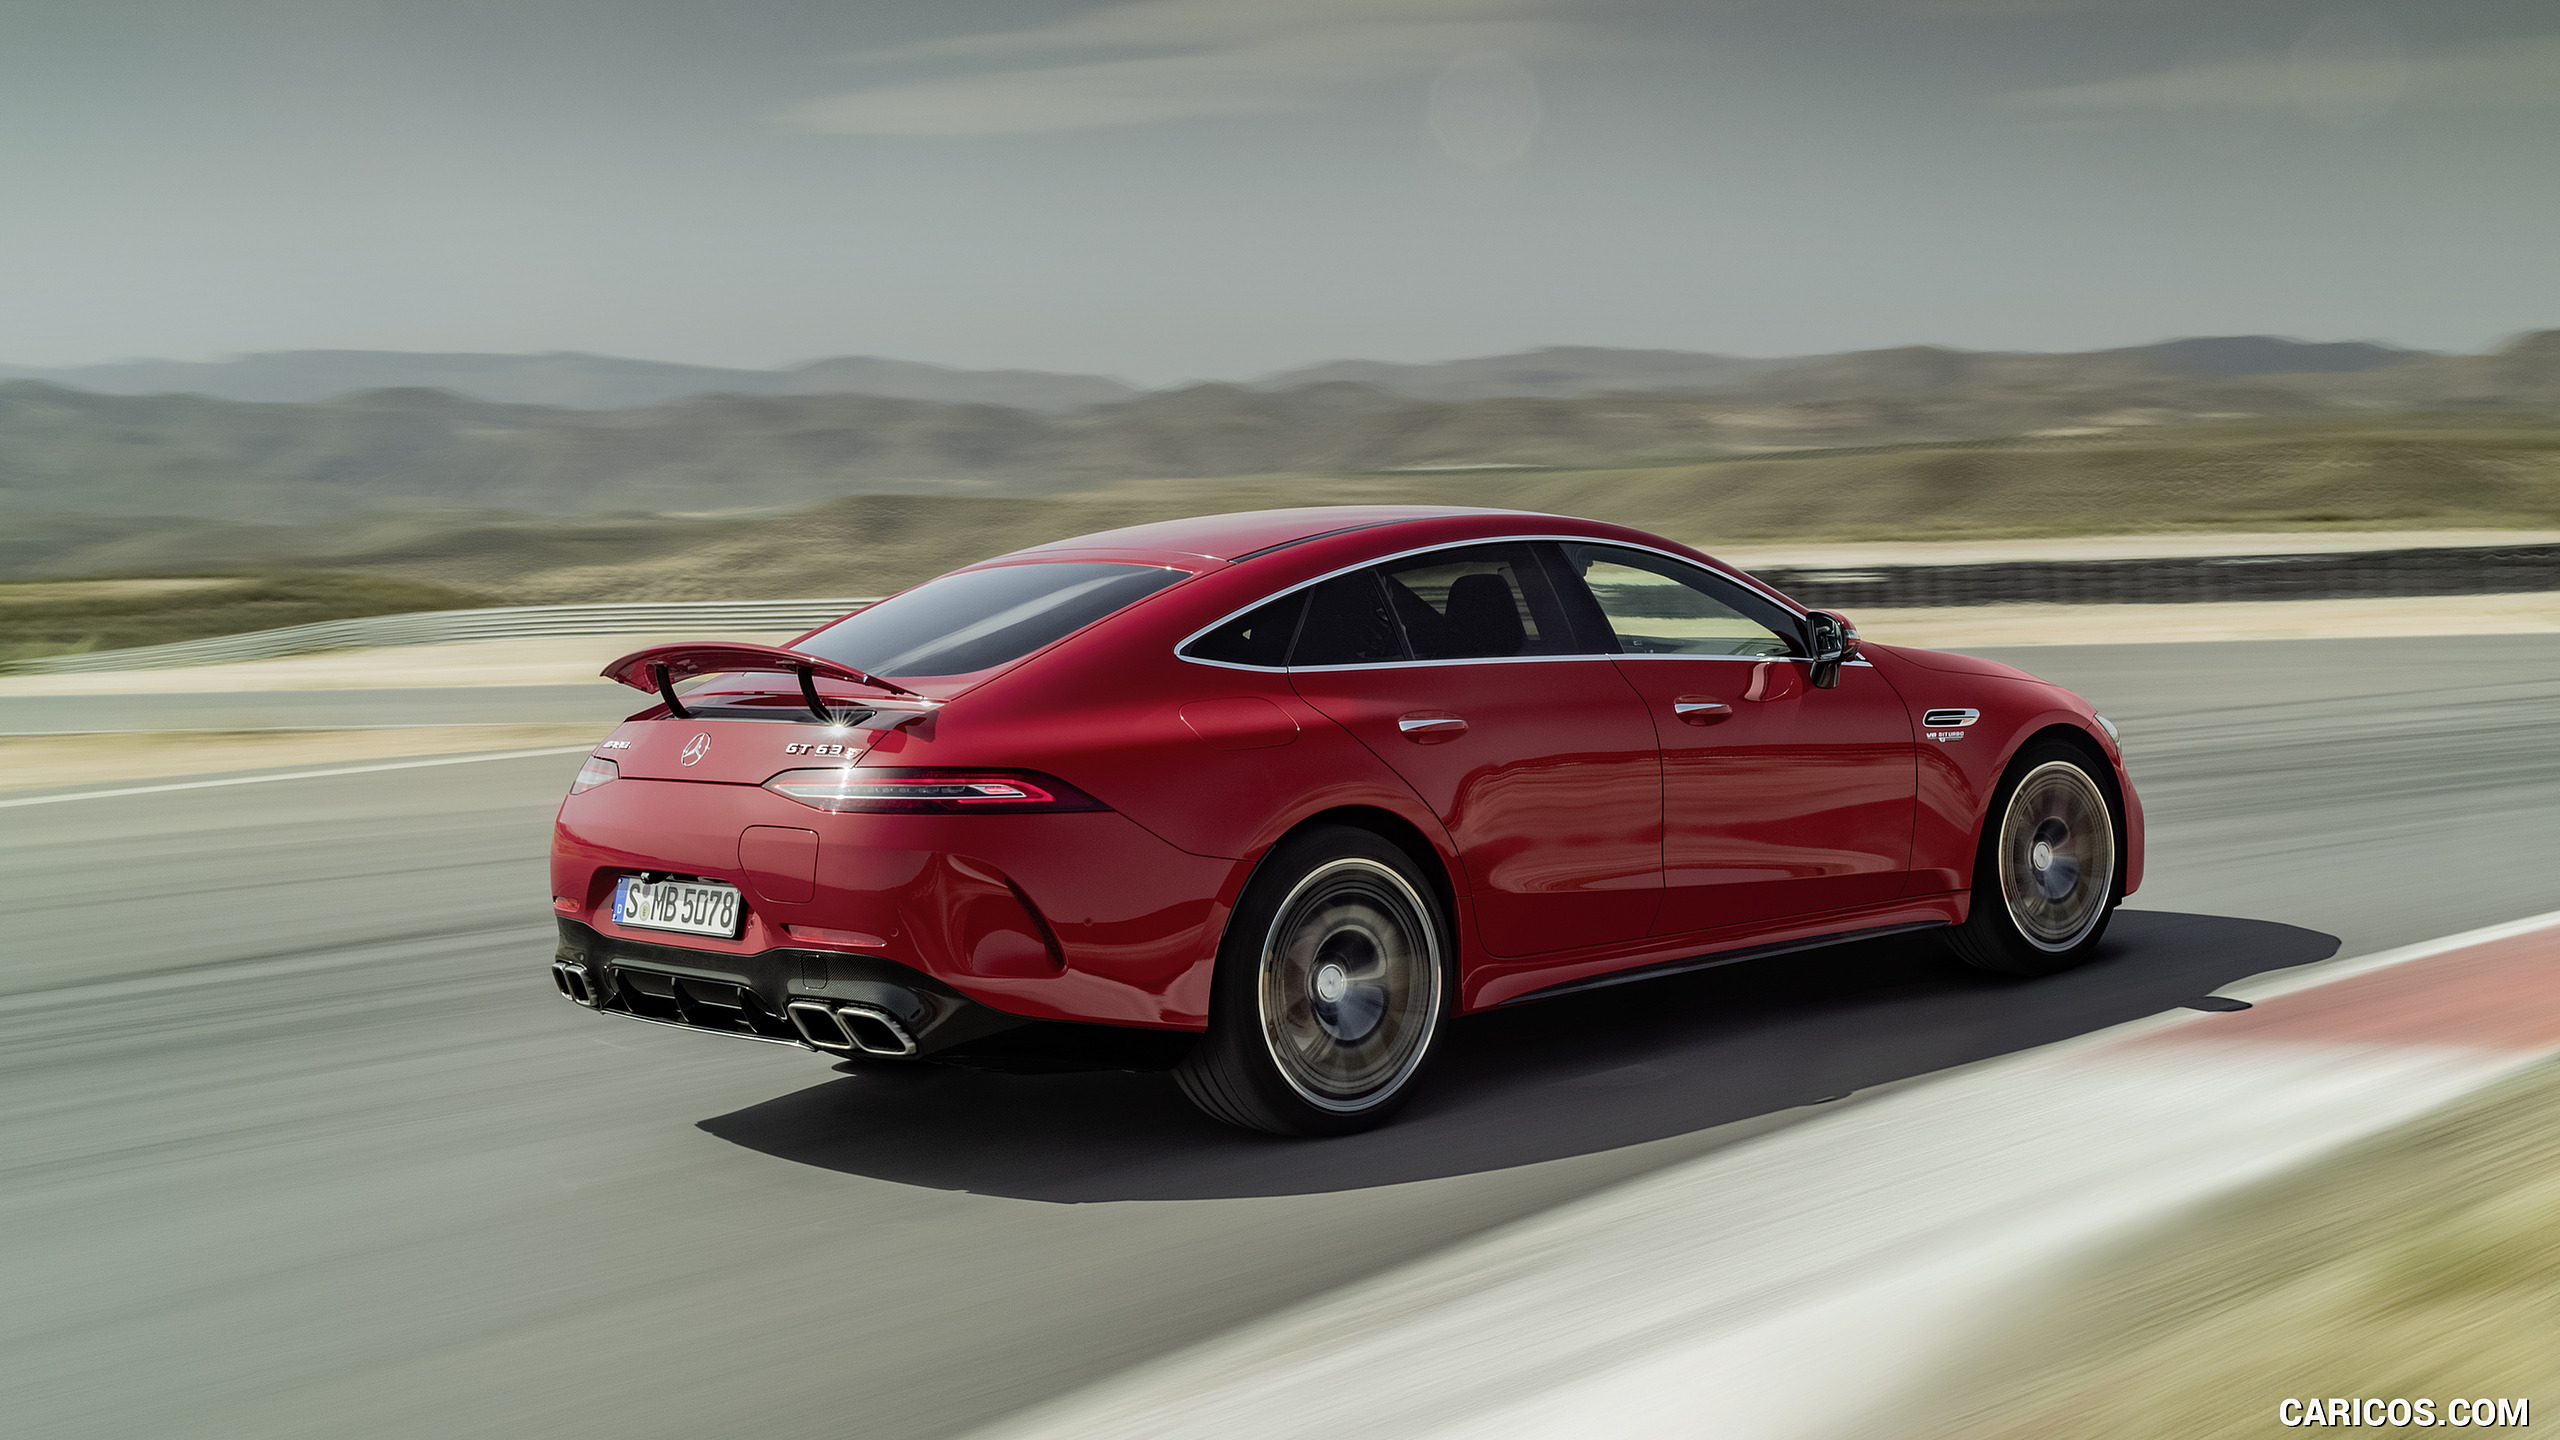 2022 Mercedes-AMG GT 63 S E Performance 4MATIC+ (Color: Jupiter Red) - Rear Three-Quarter, #6 of 88